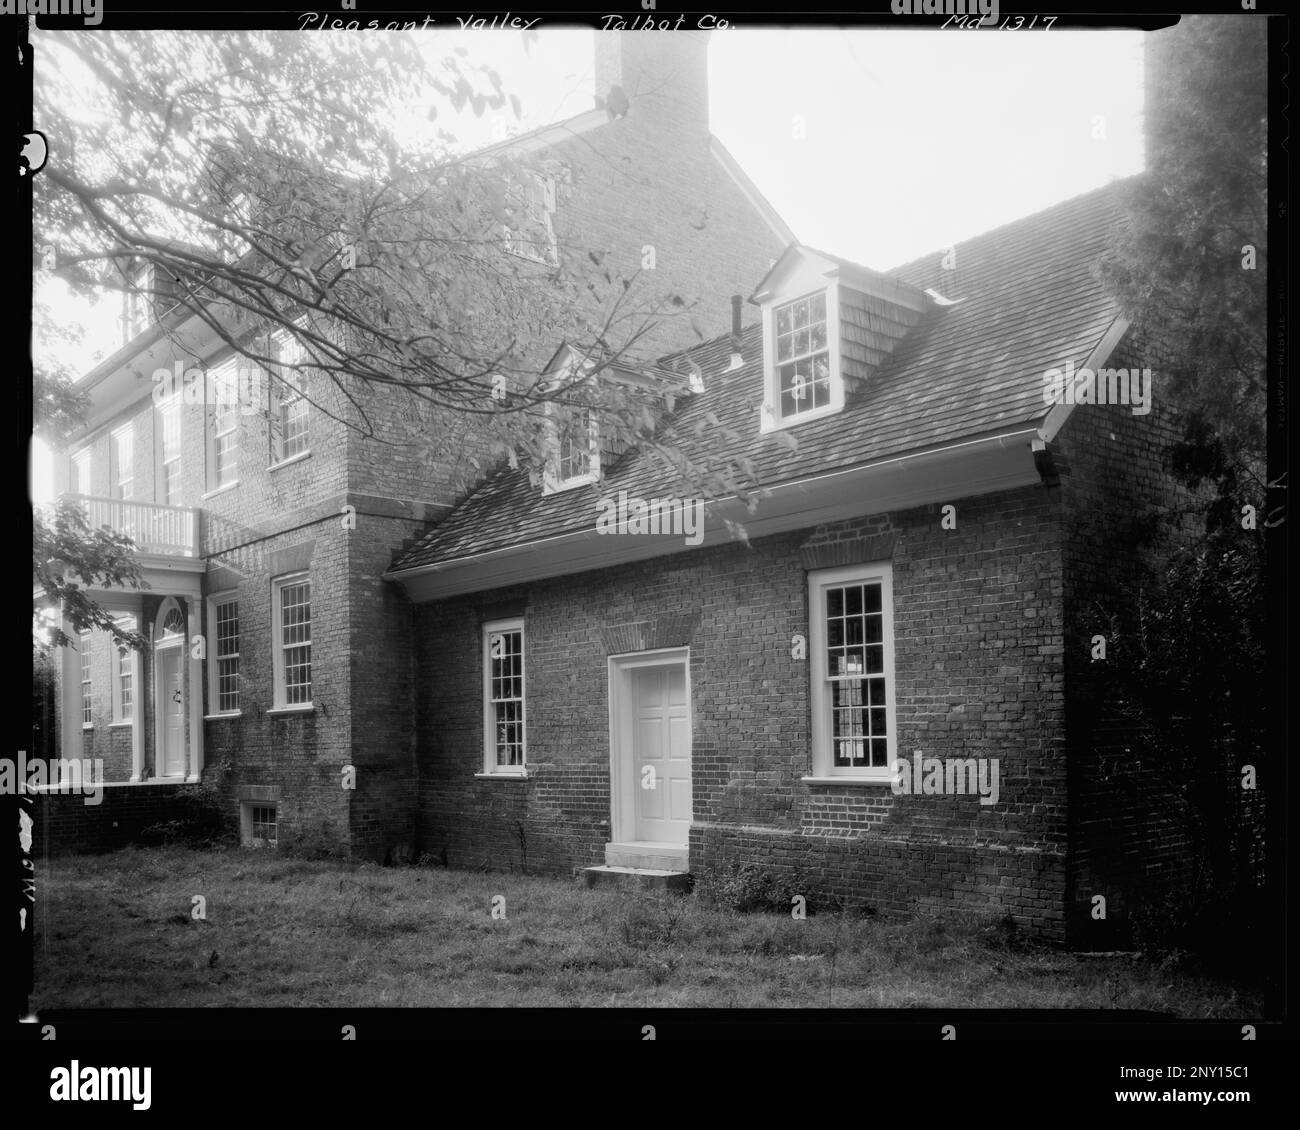 Pleasant Valley, Easton, Talbot County, Maryland. Carnegie Survey of the Architecture of the South. United States, Maryland, Talbot County, Easton,  Brickwork,  Dormers,  Houses. Stock Photo